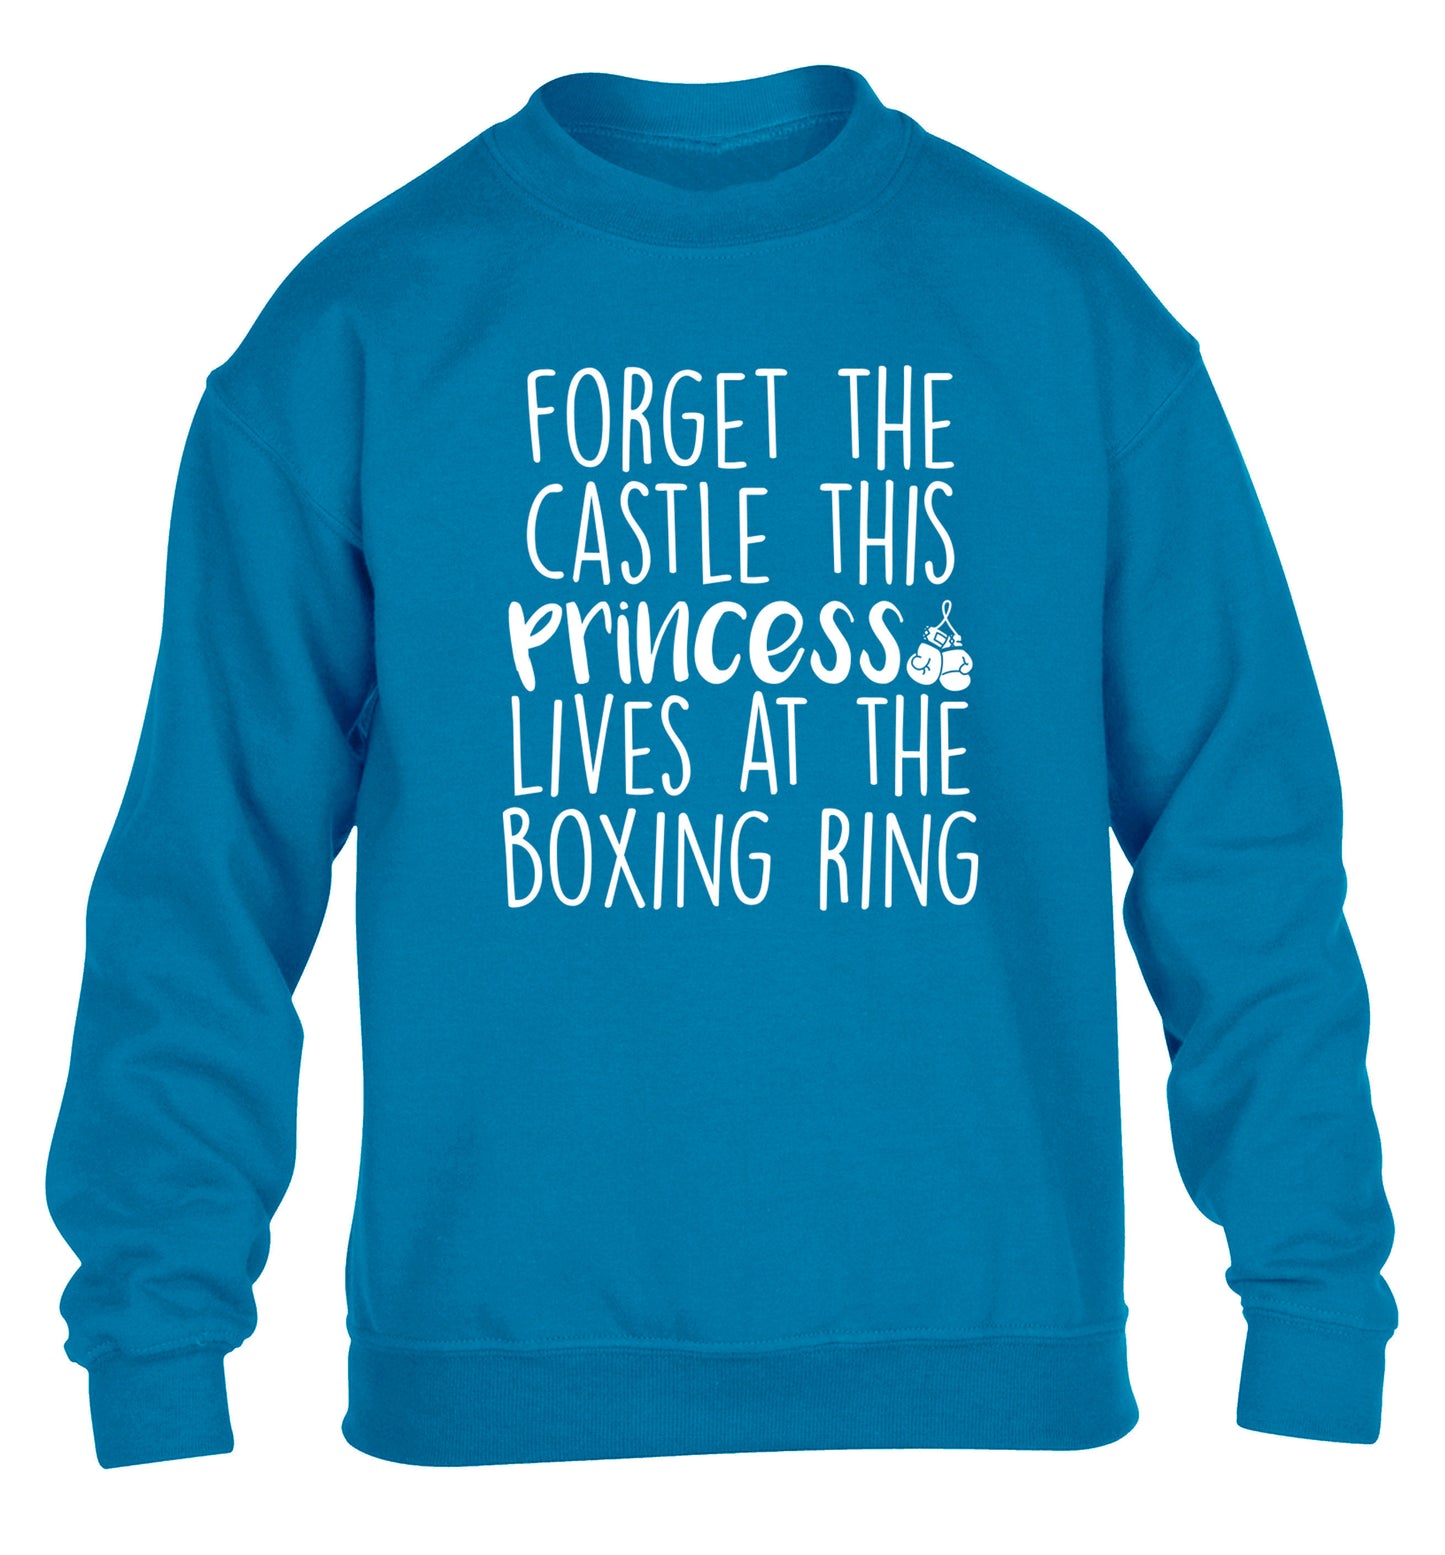 Forget the castle this princess lives at the boxing ring children's blue sweater 12-14 Years